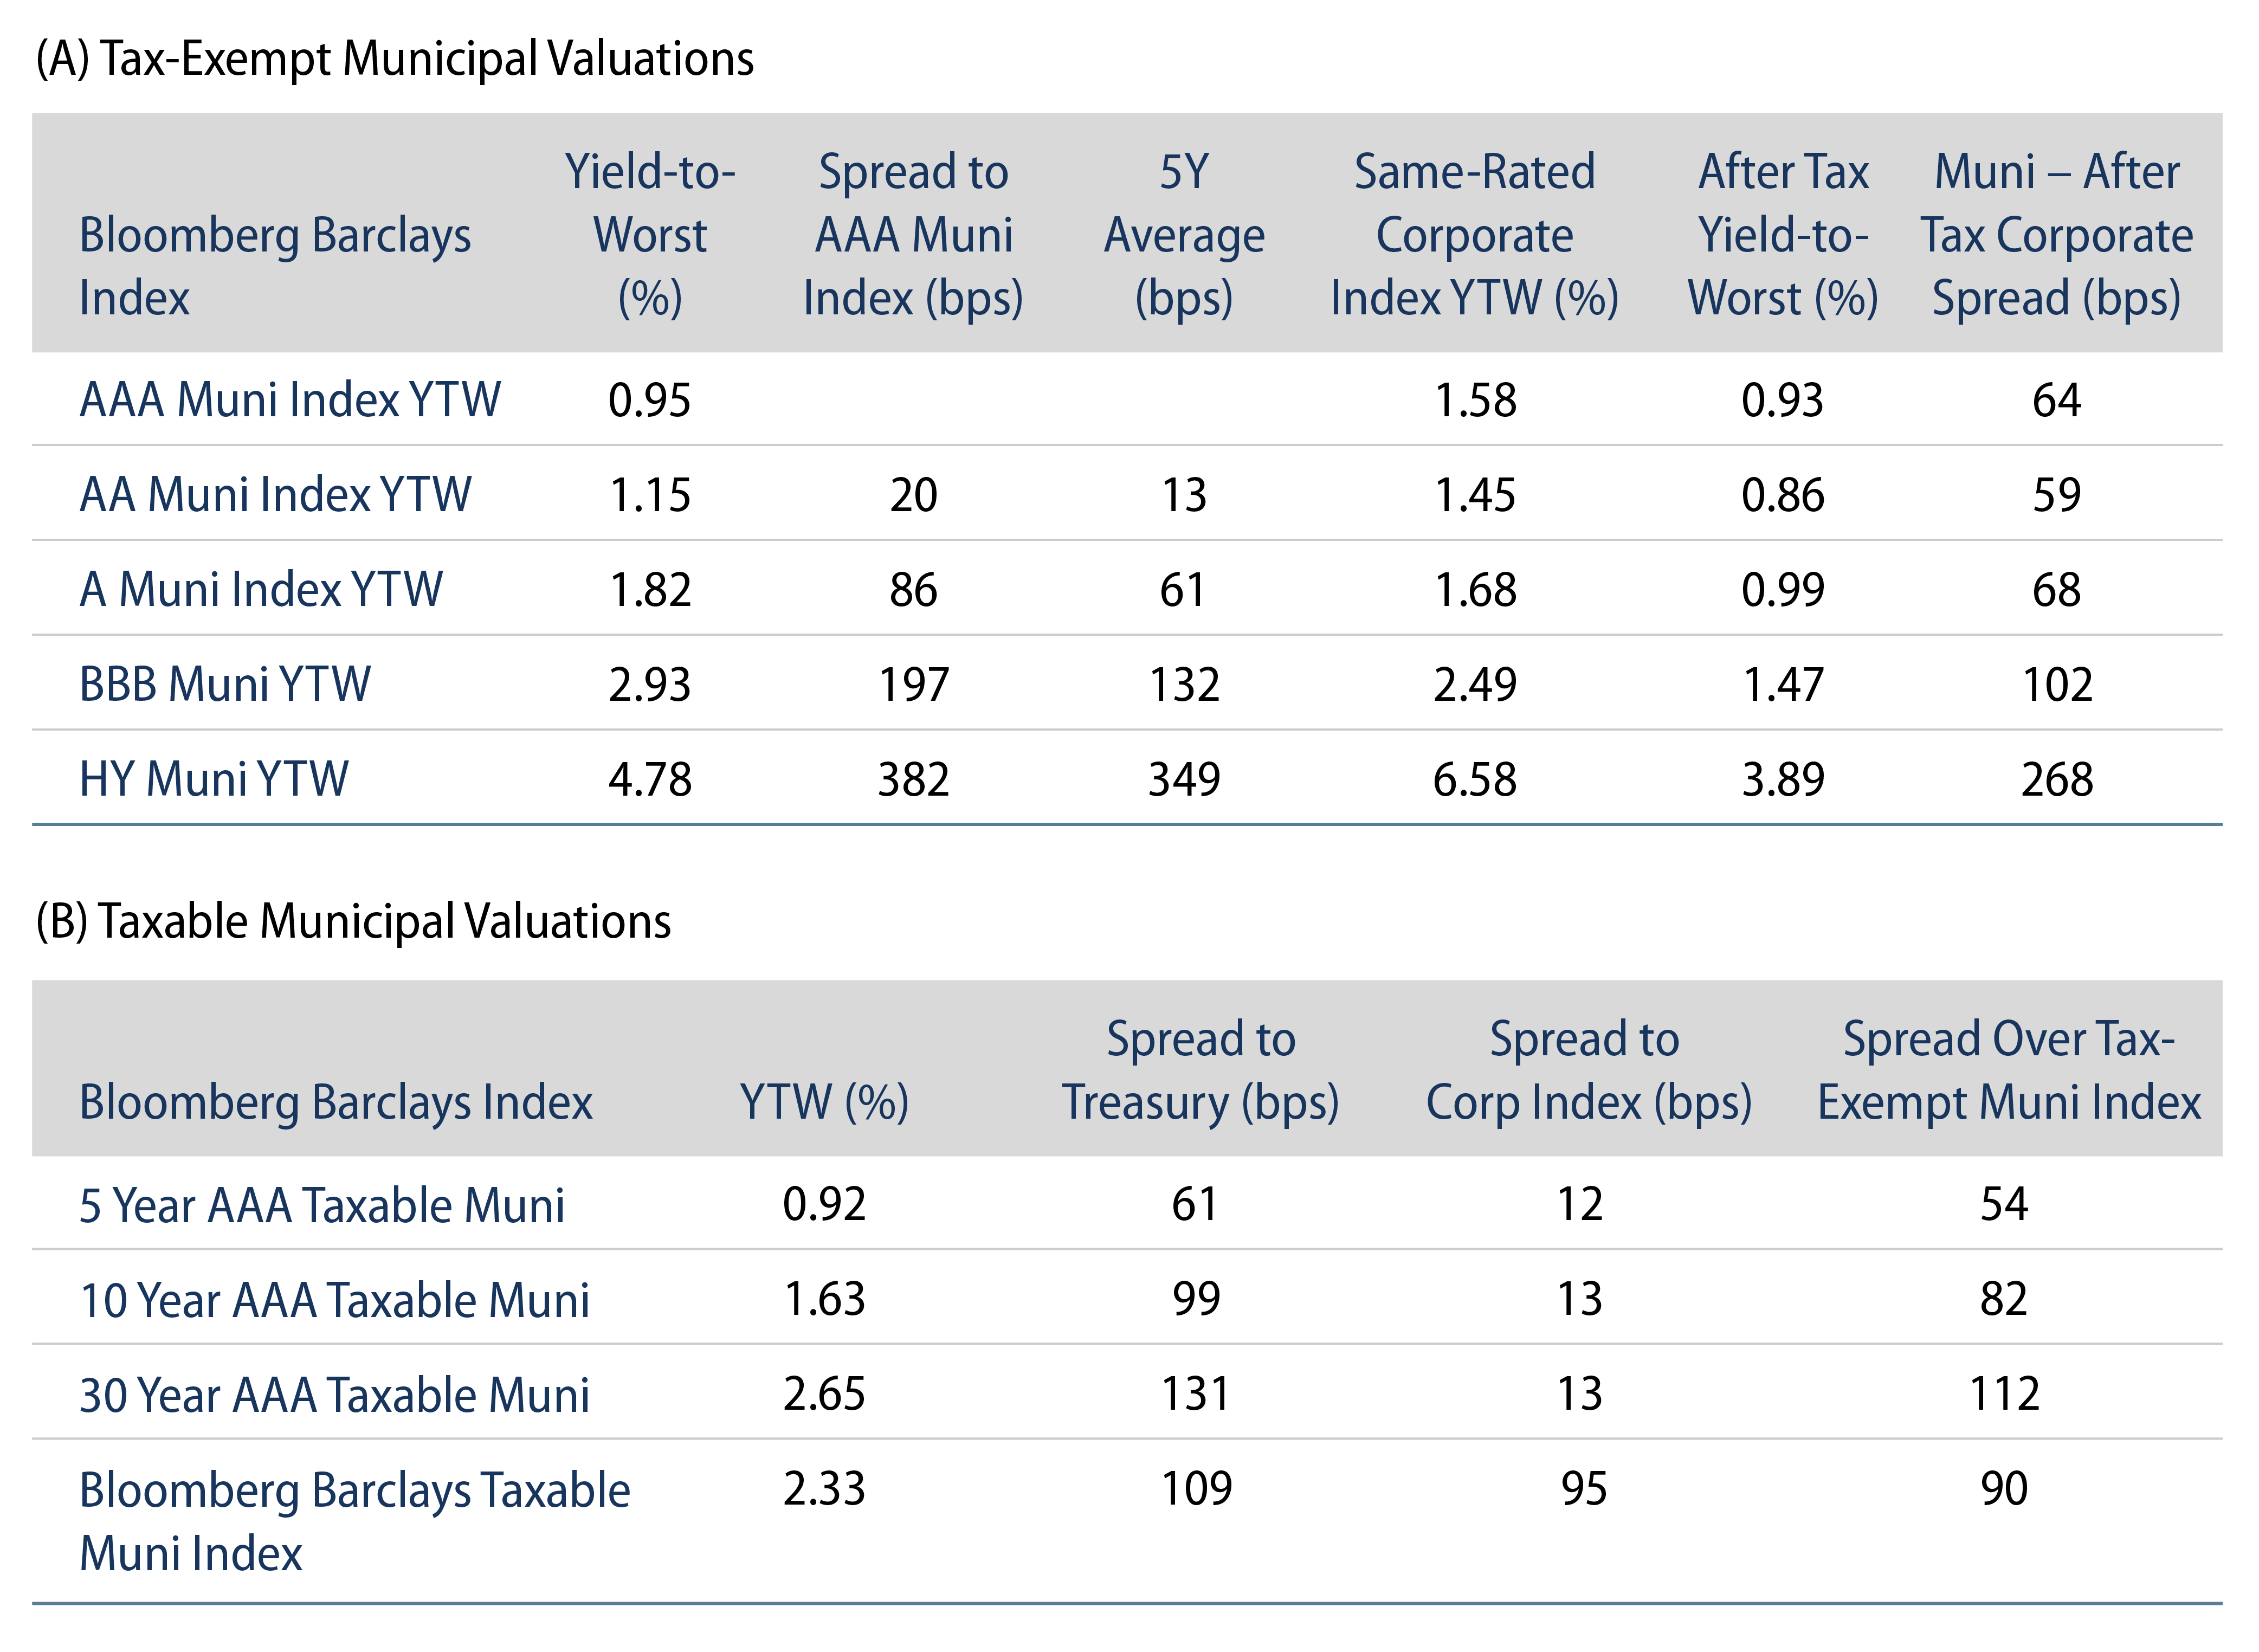 Tax-Exempt and Taxable Municipal Valuations